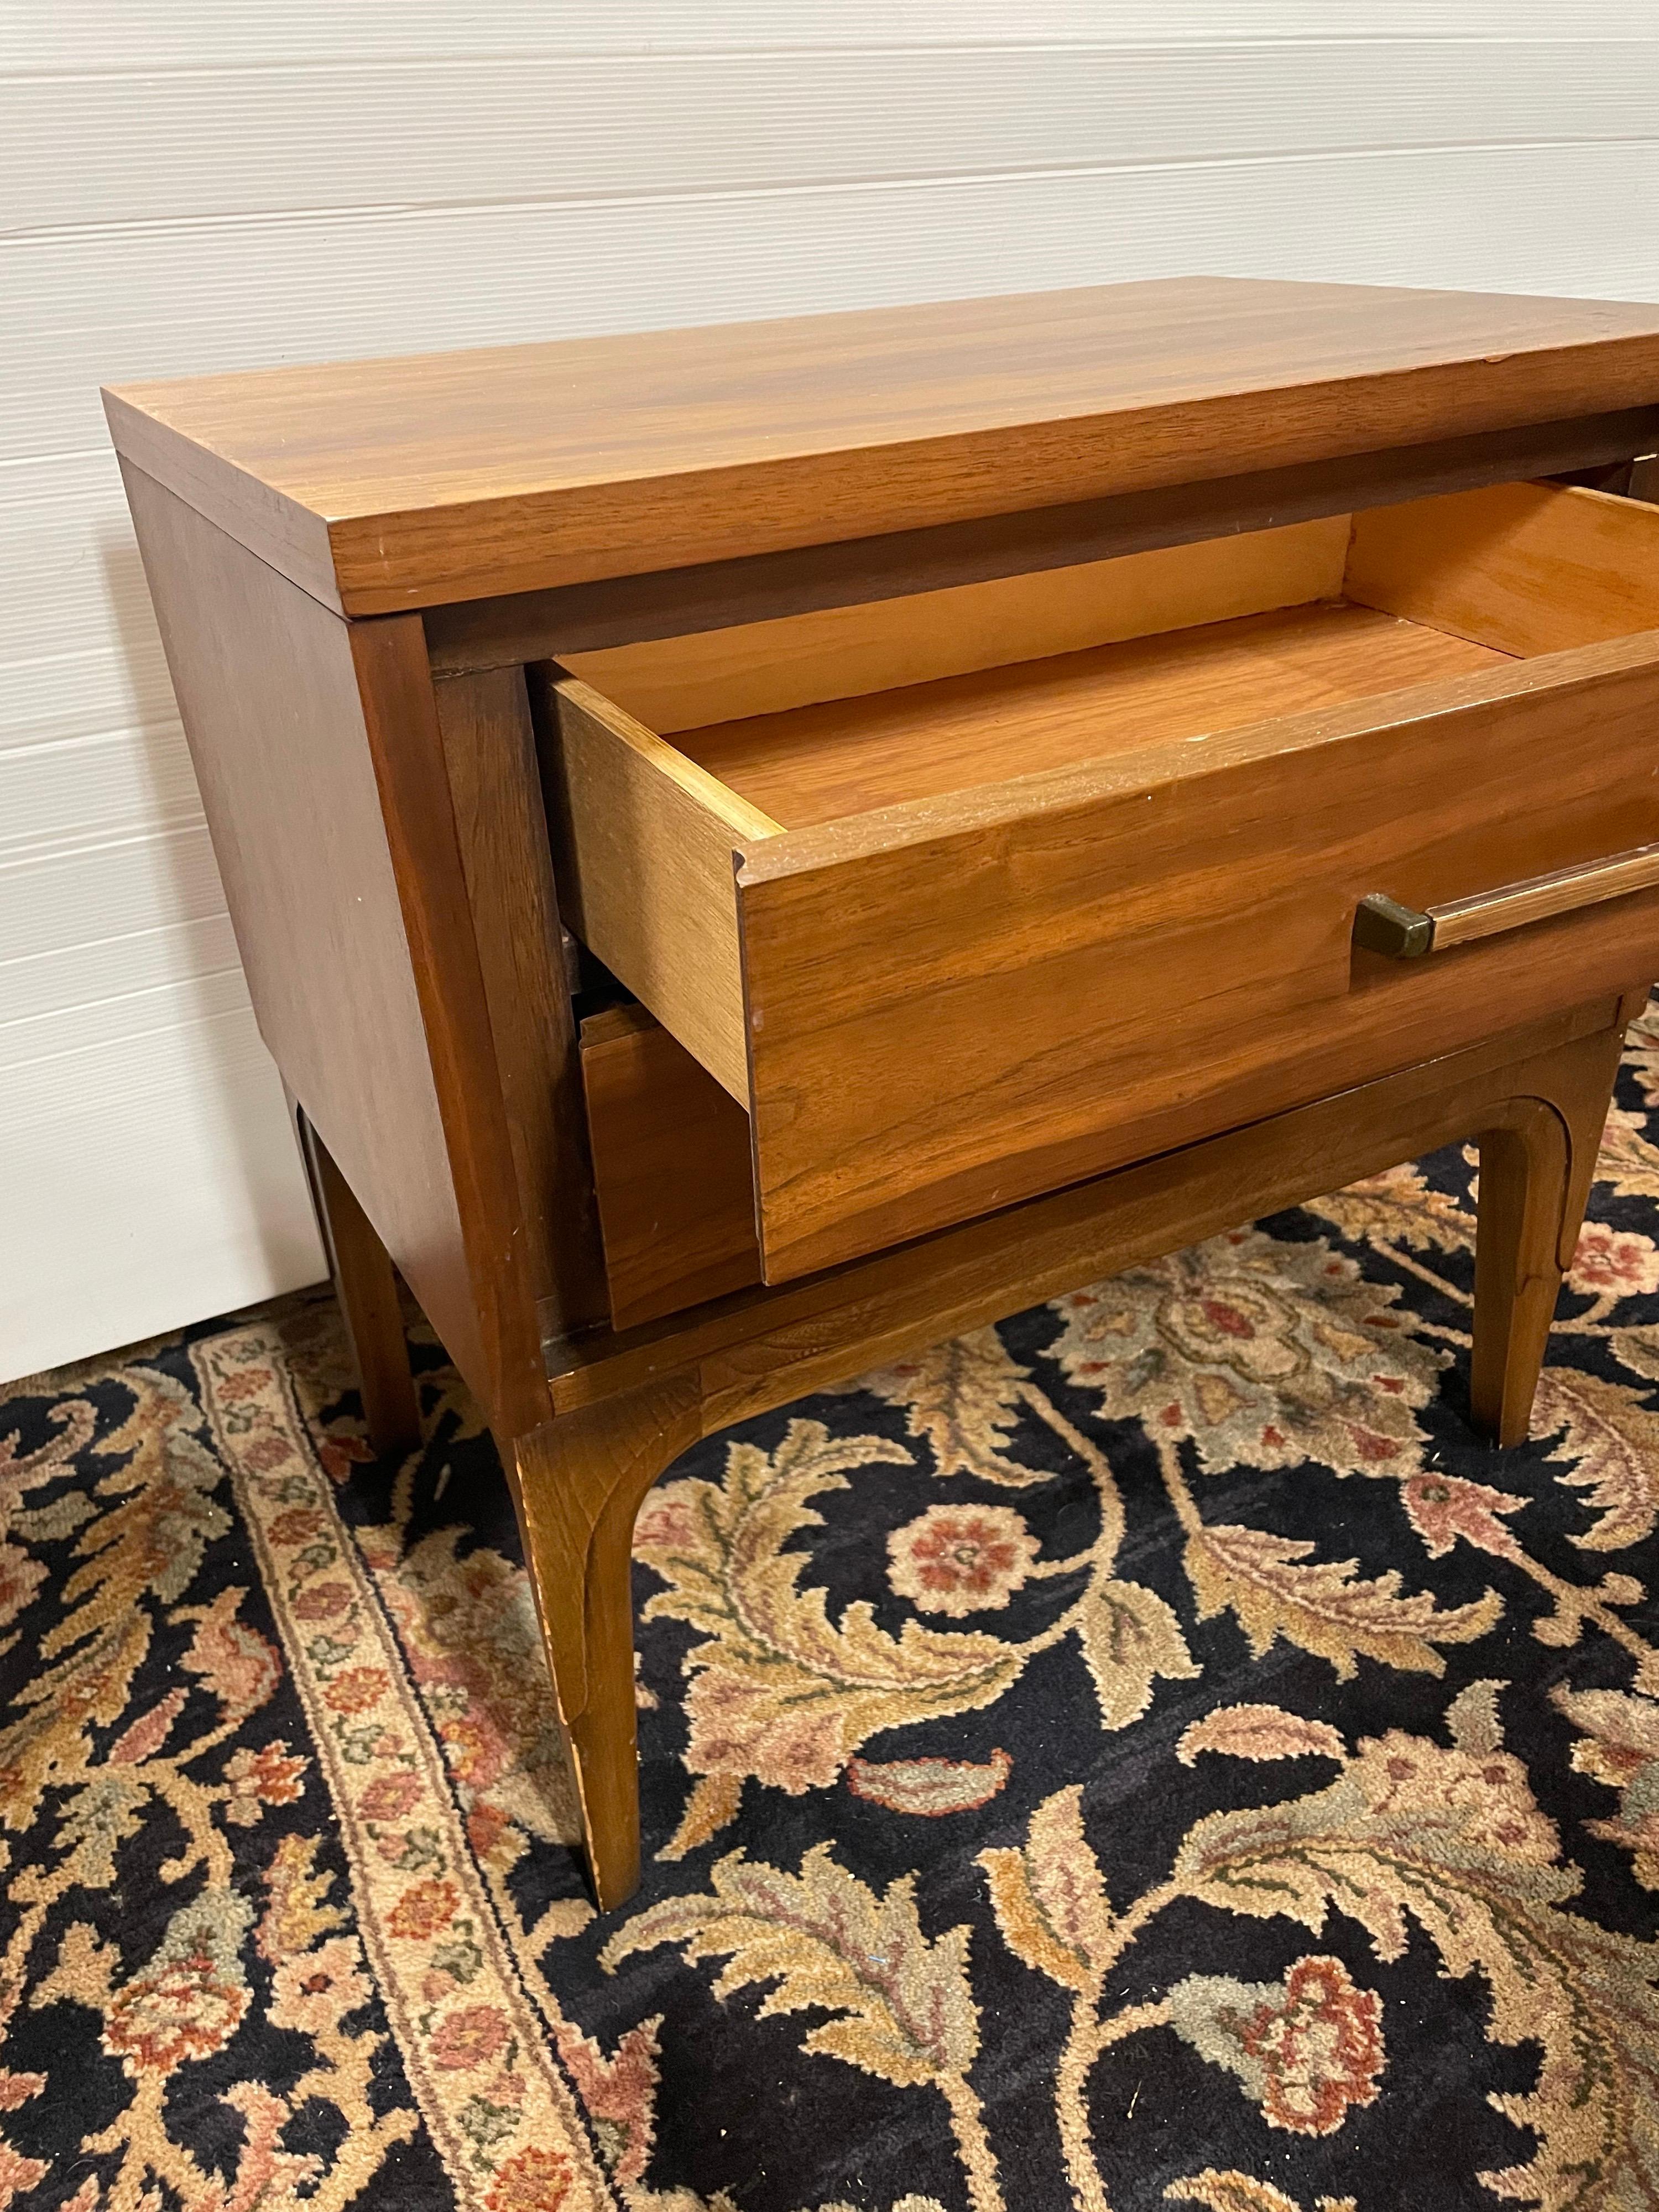 Vintage Mid-Century Modern 2 drawer Walnut Nightstand, believed to be made by Dixie Furniture.